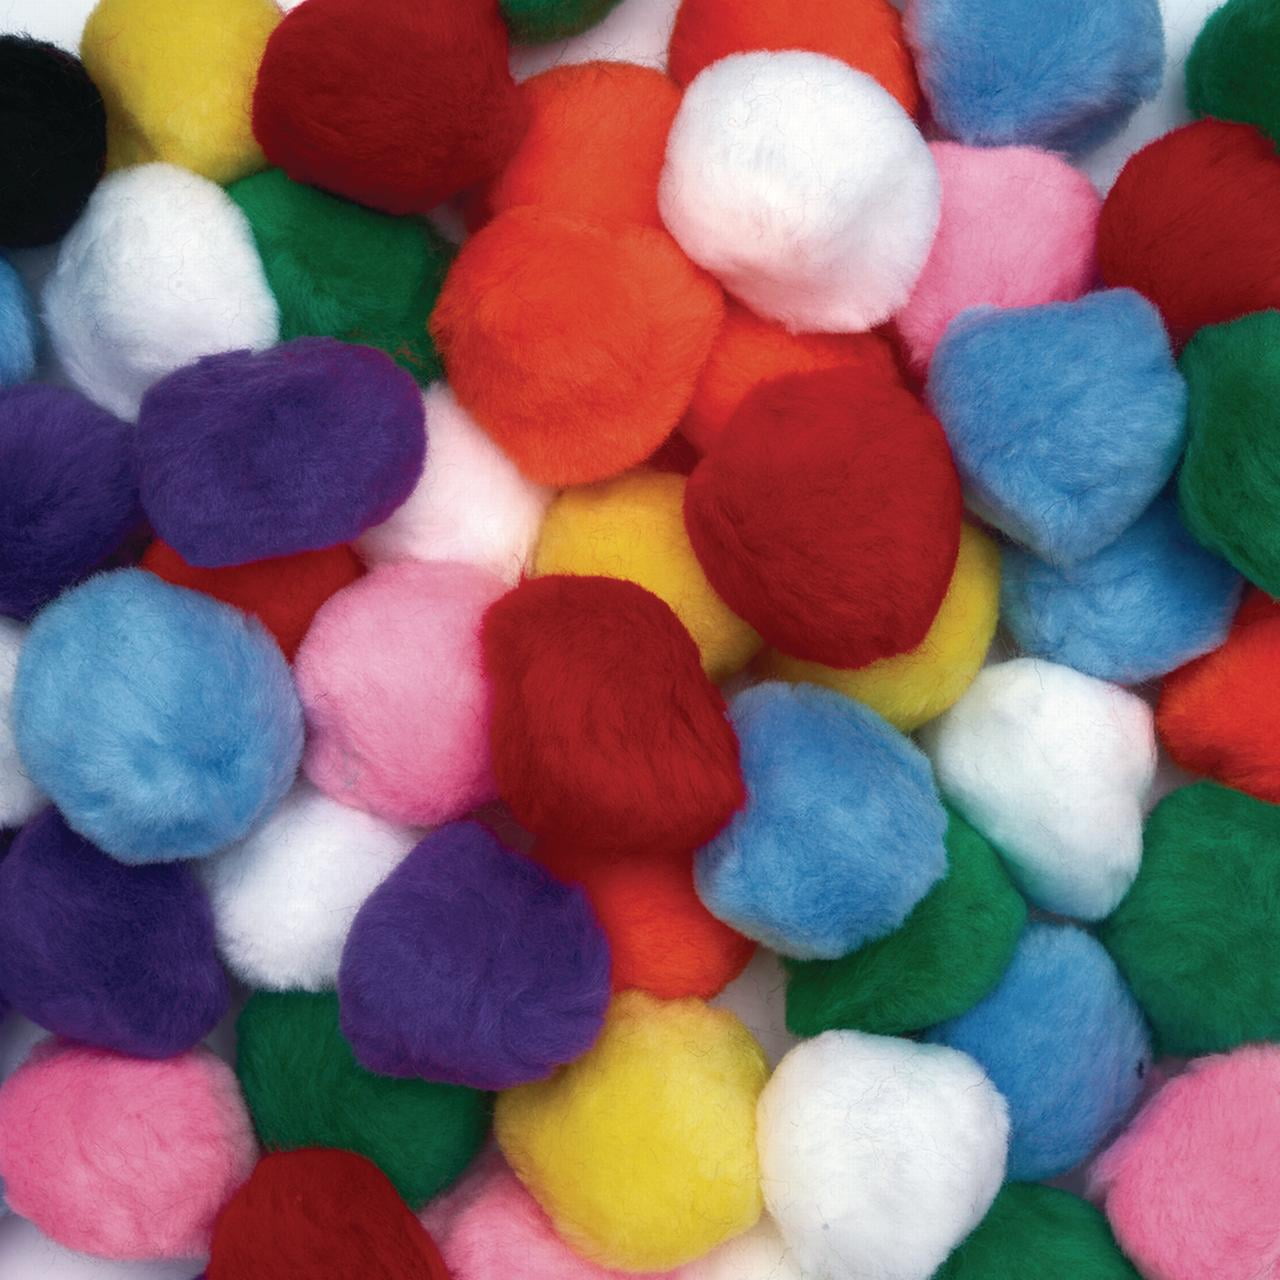 Amaney 1000 Pieces 0.4 Inch Paddy Polyester Pom Poms Pompoms for Hobby Supplies and DIY Creative Crafts Decorations 10mm 